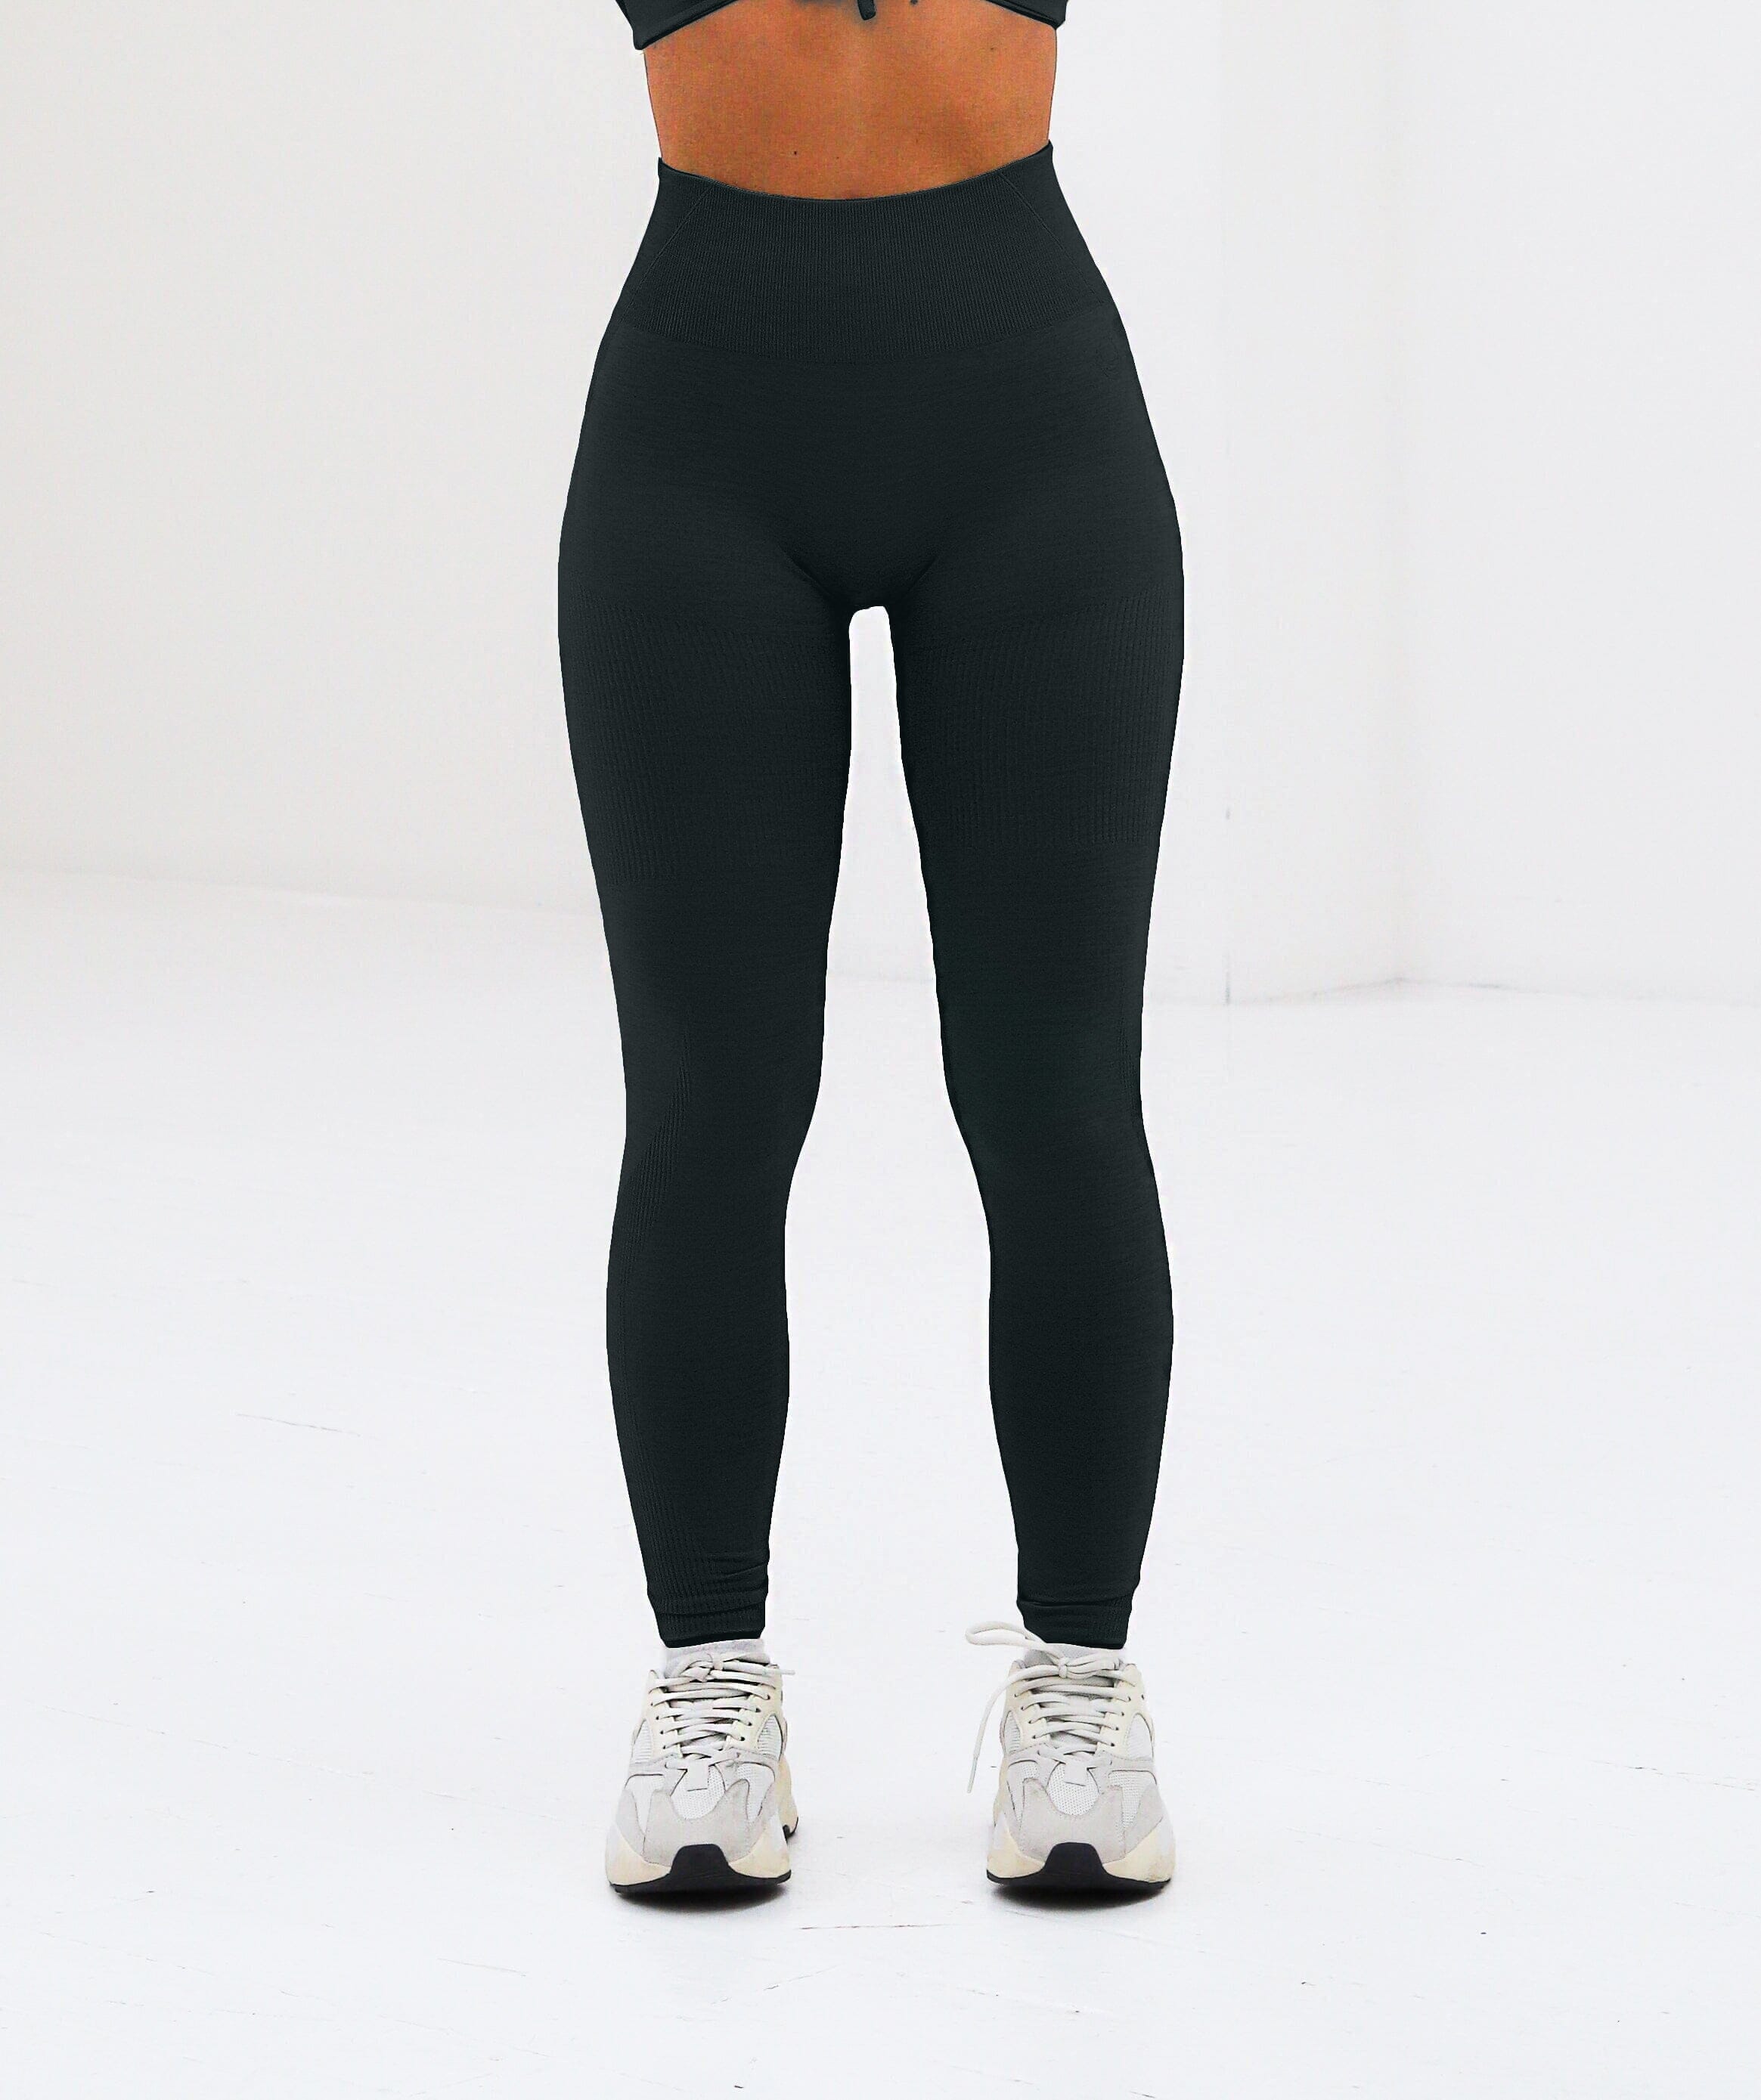 Hero Contour Legging in Charcoal Black – Actively Conscious